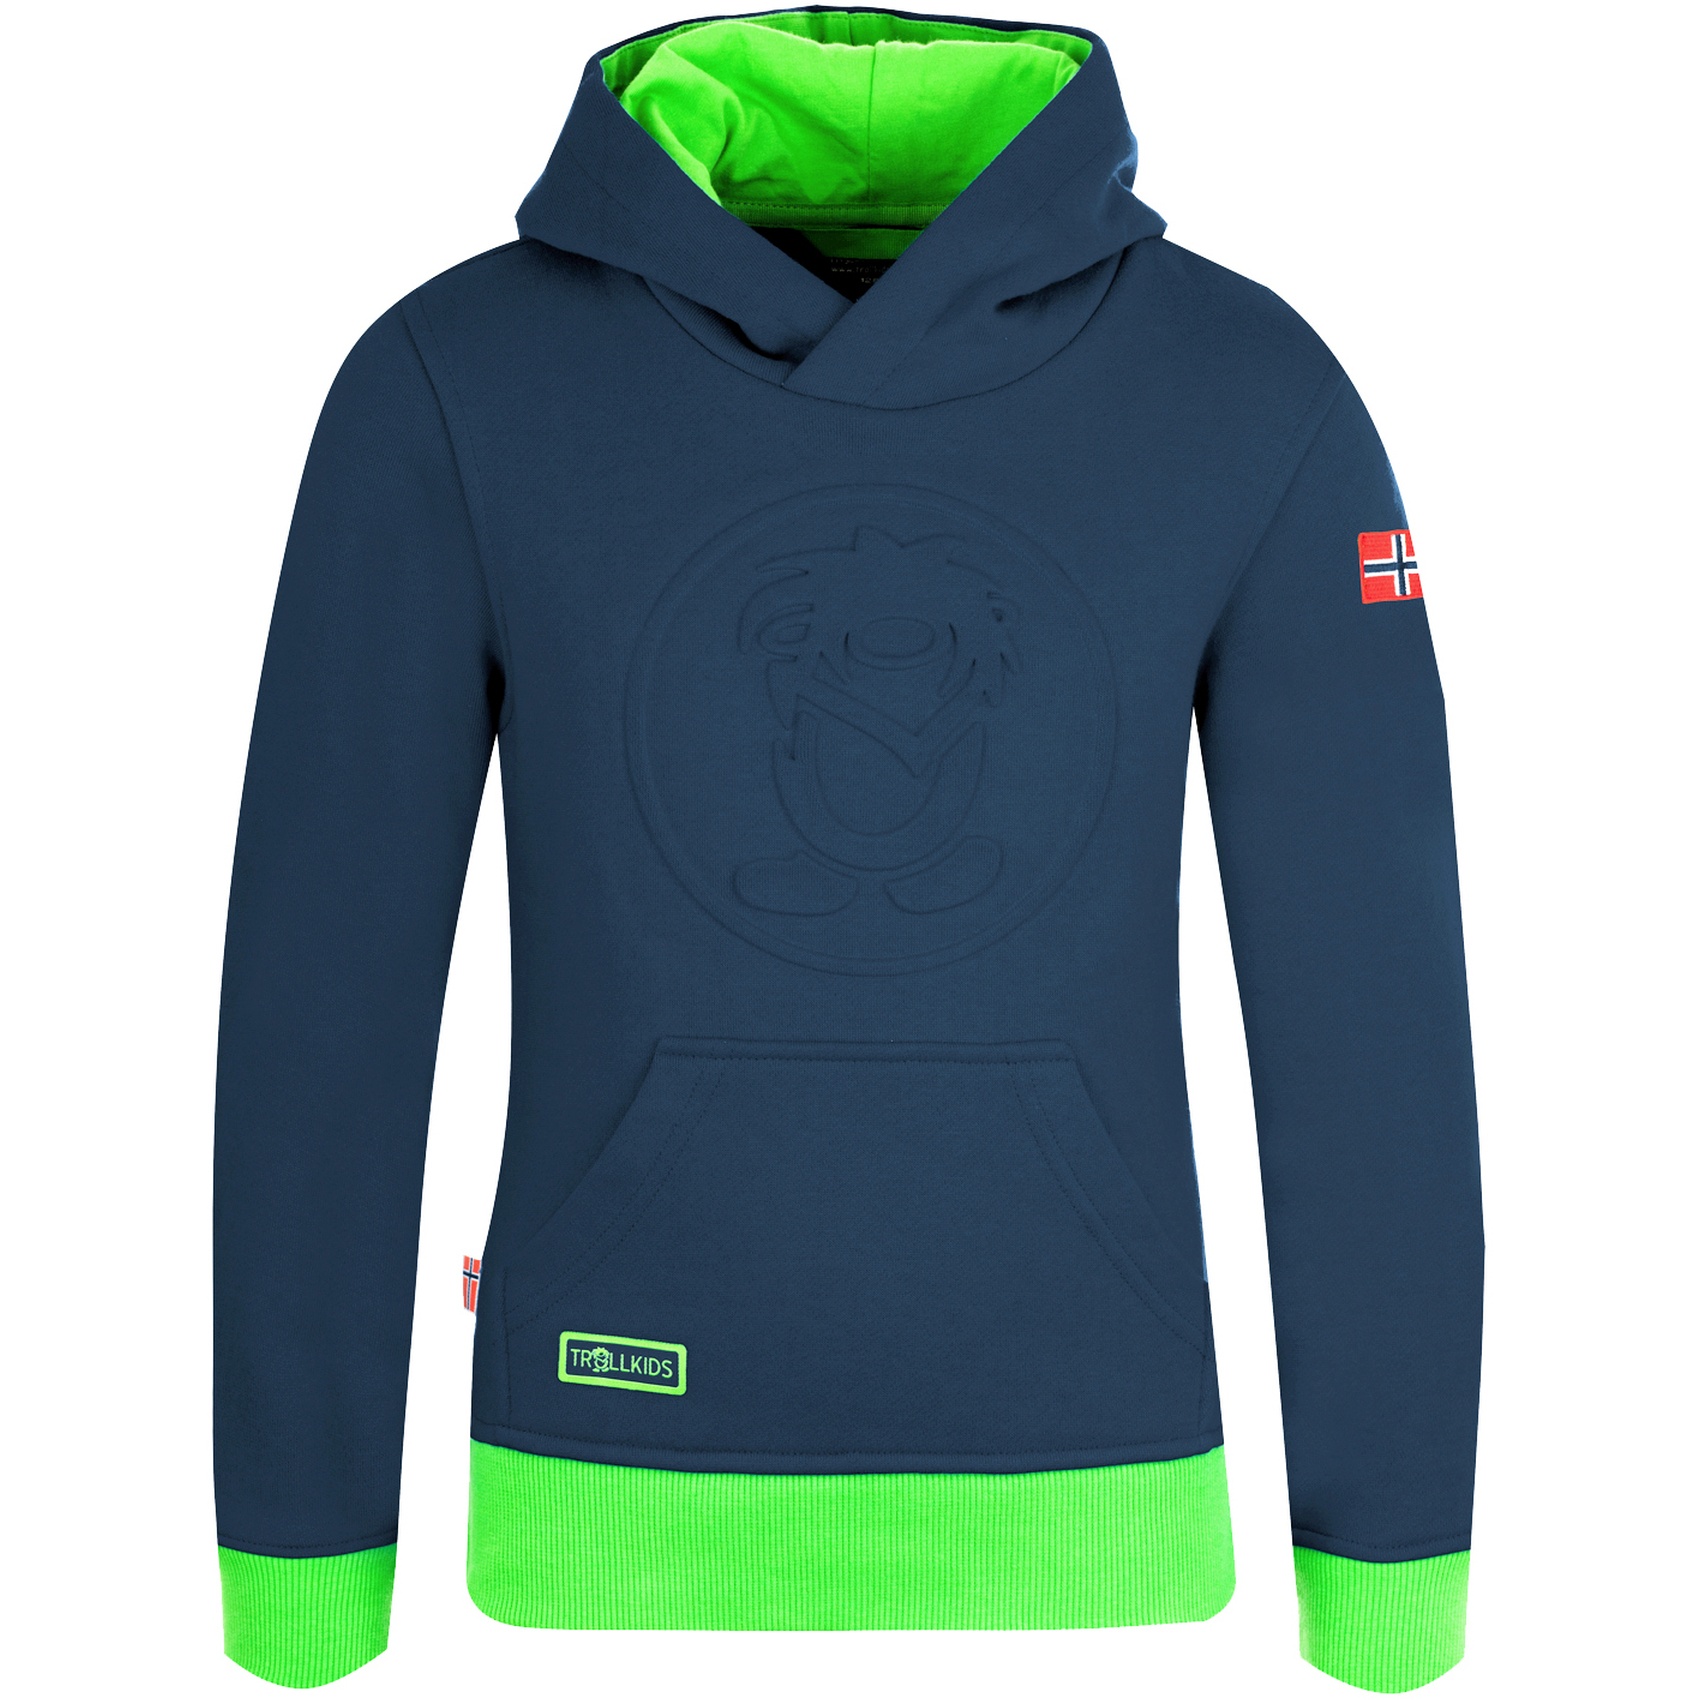 Picture of Trollkids Lillehammer Kids Sweater - navy/bright green